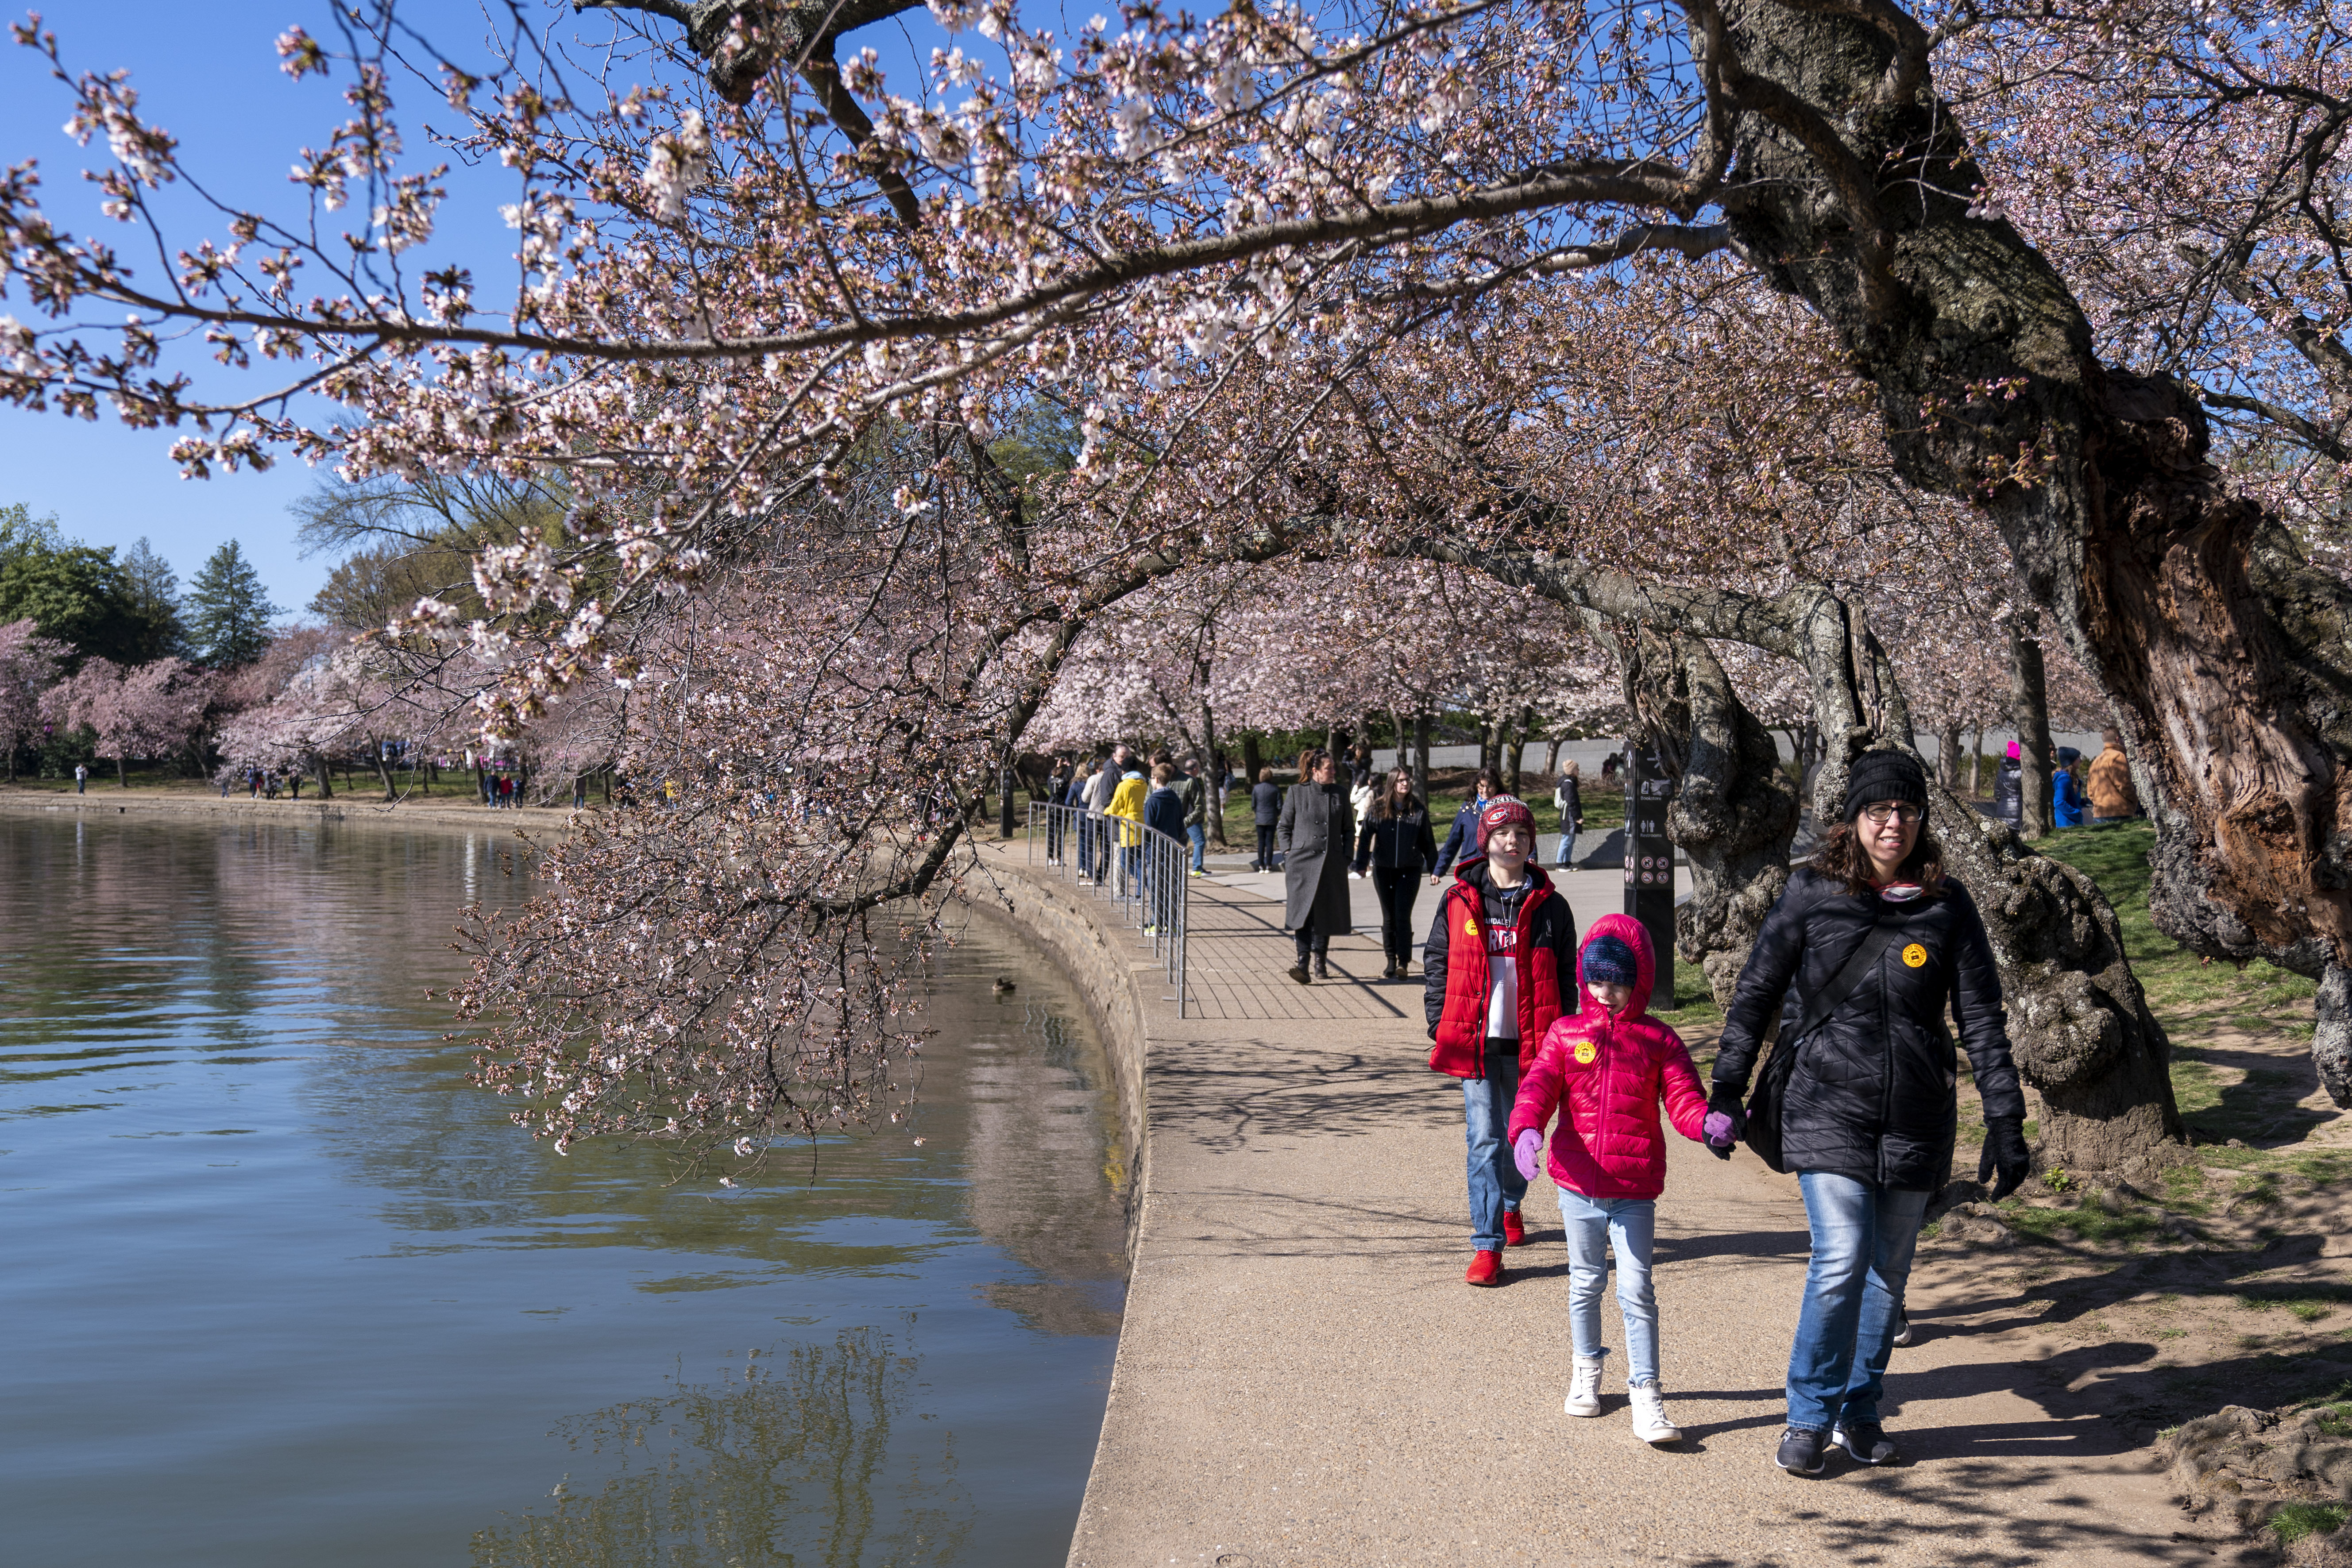 Here's Where You Can See Cherry Blossoms In The U.S.